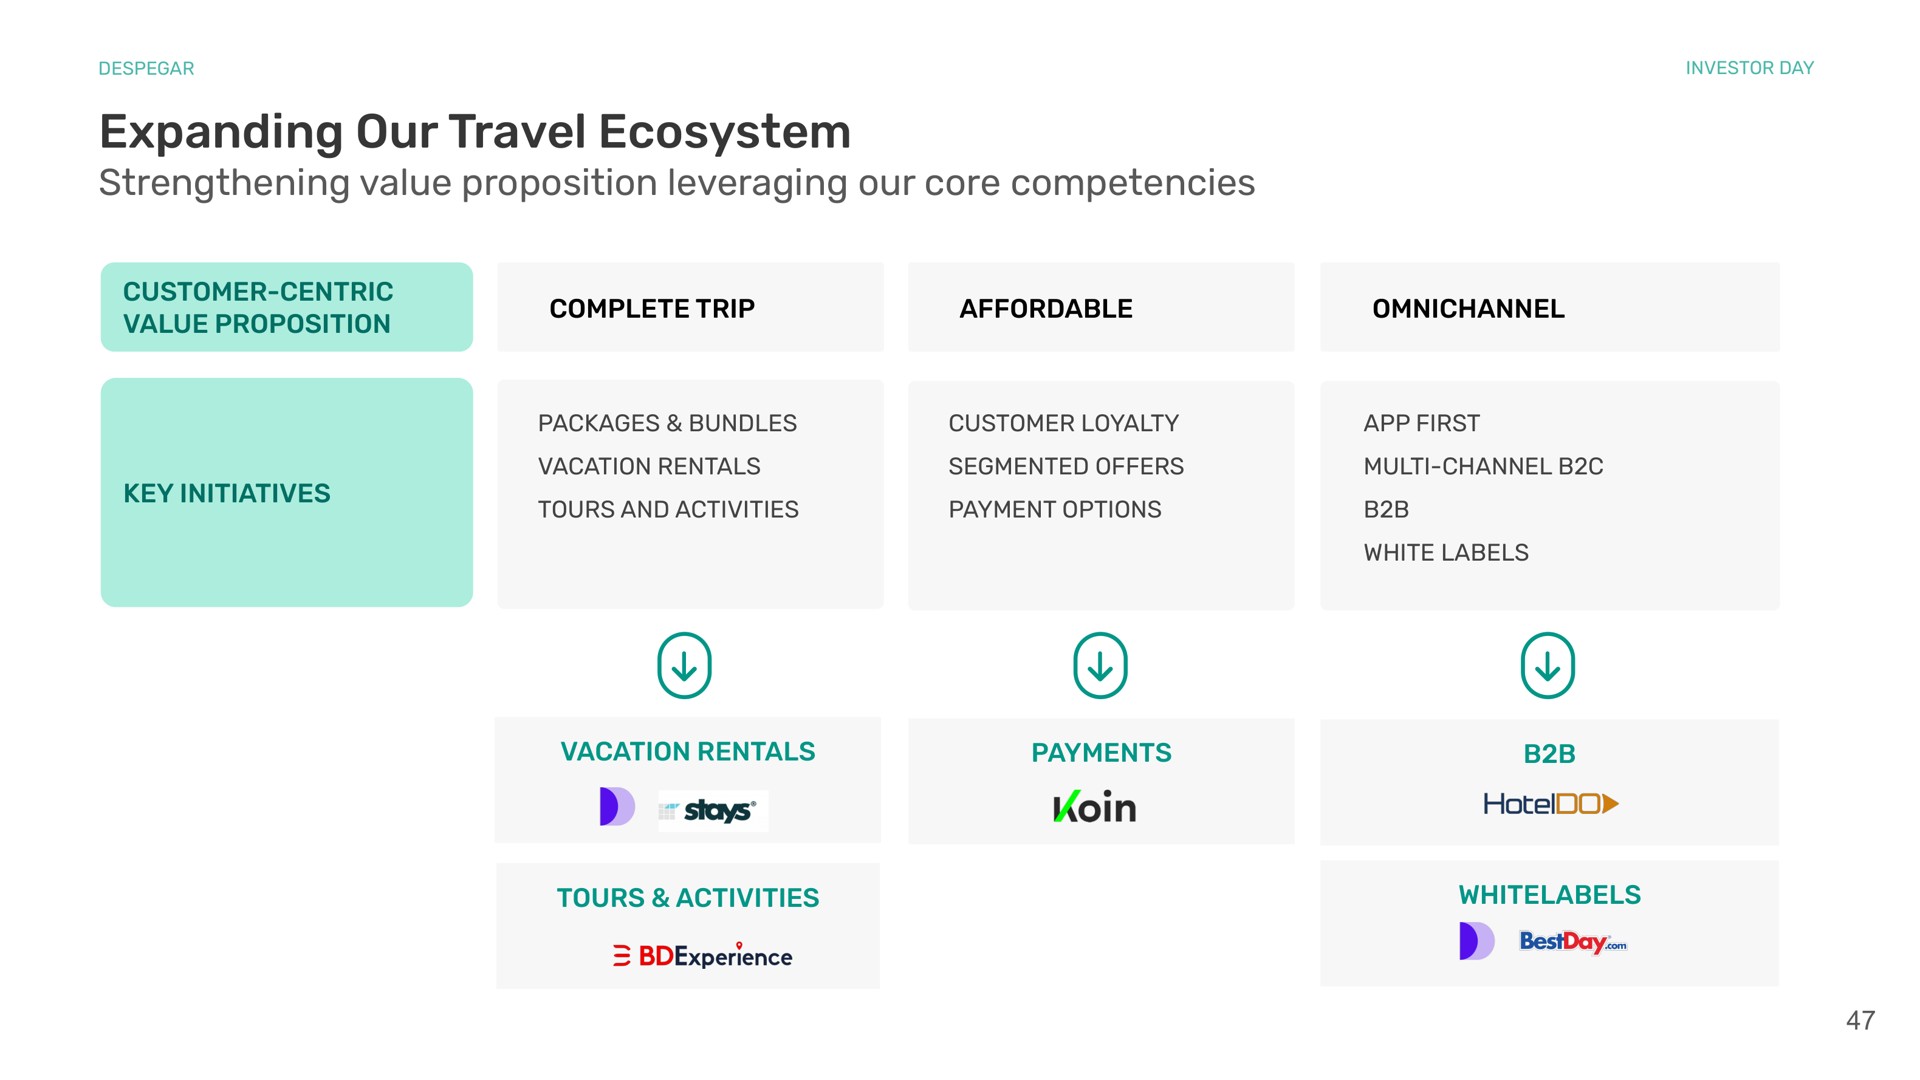 customer centric value proposition expanding our travel ecosystem strengthening value proposition leveraging our core competencies customer centric value proposition complete trip affordable key initiatives vacation rentals payments tours activities | Despegar